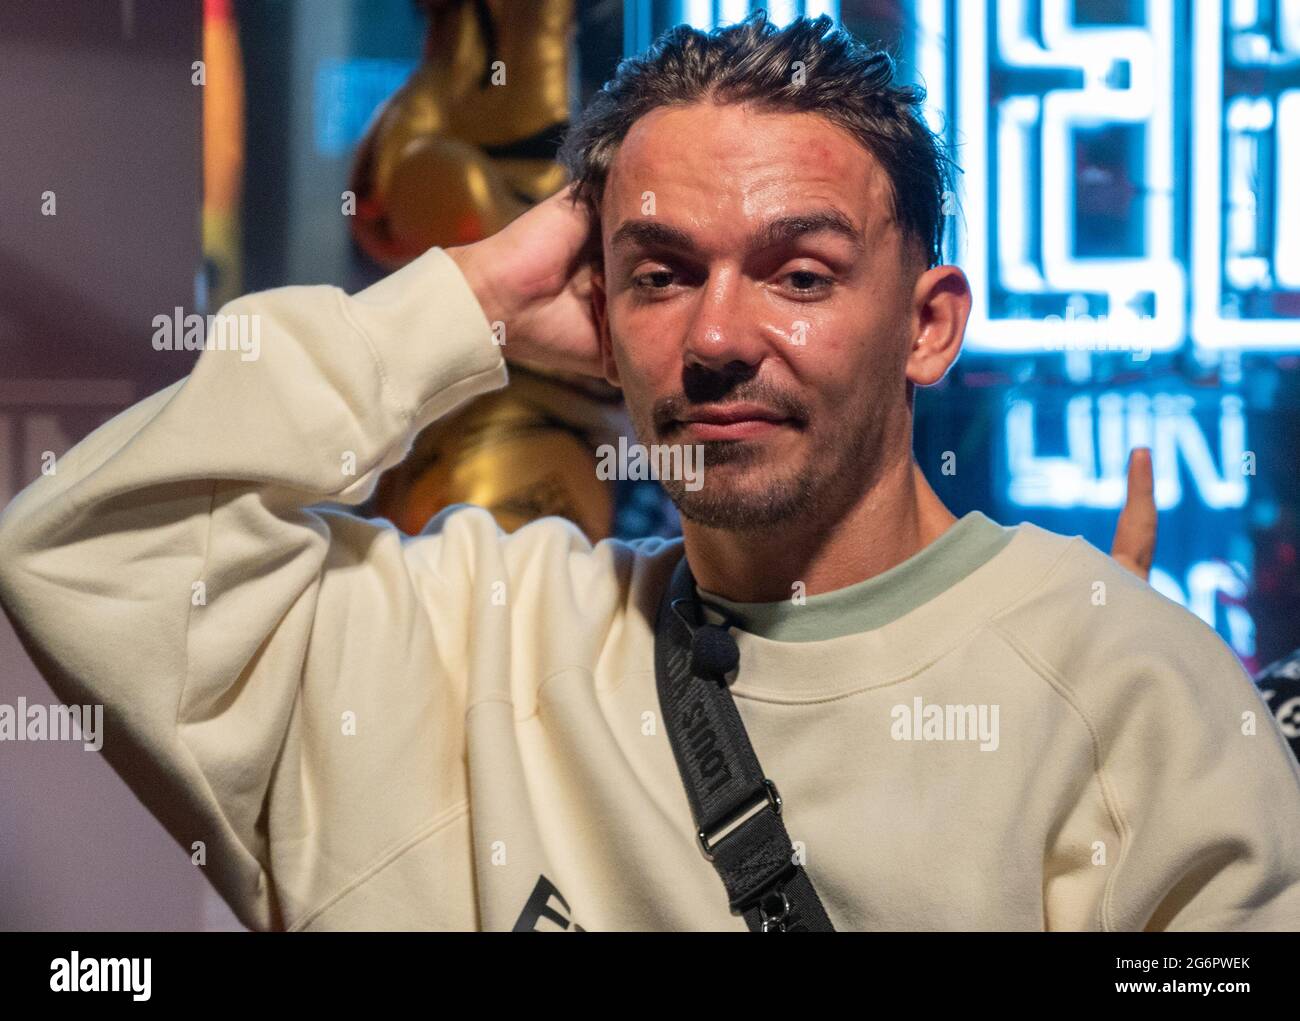 https://c8.alamy.com/comp/2G6PWEK/berlin-germany-08th-july-2021-german-rapper-capital-bra-stands-at-the-unveiling-of-his-wax-figure-at-madame-tussauds-berlin-credit-christophe-gateaudpaalamy-live-news-2G6PWEK.jpg